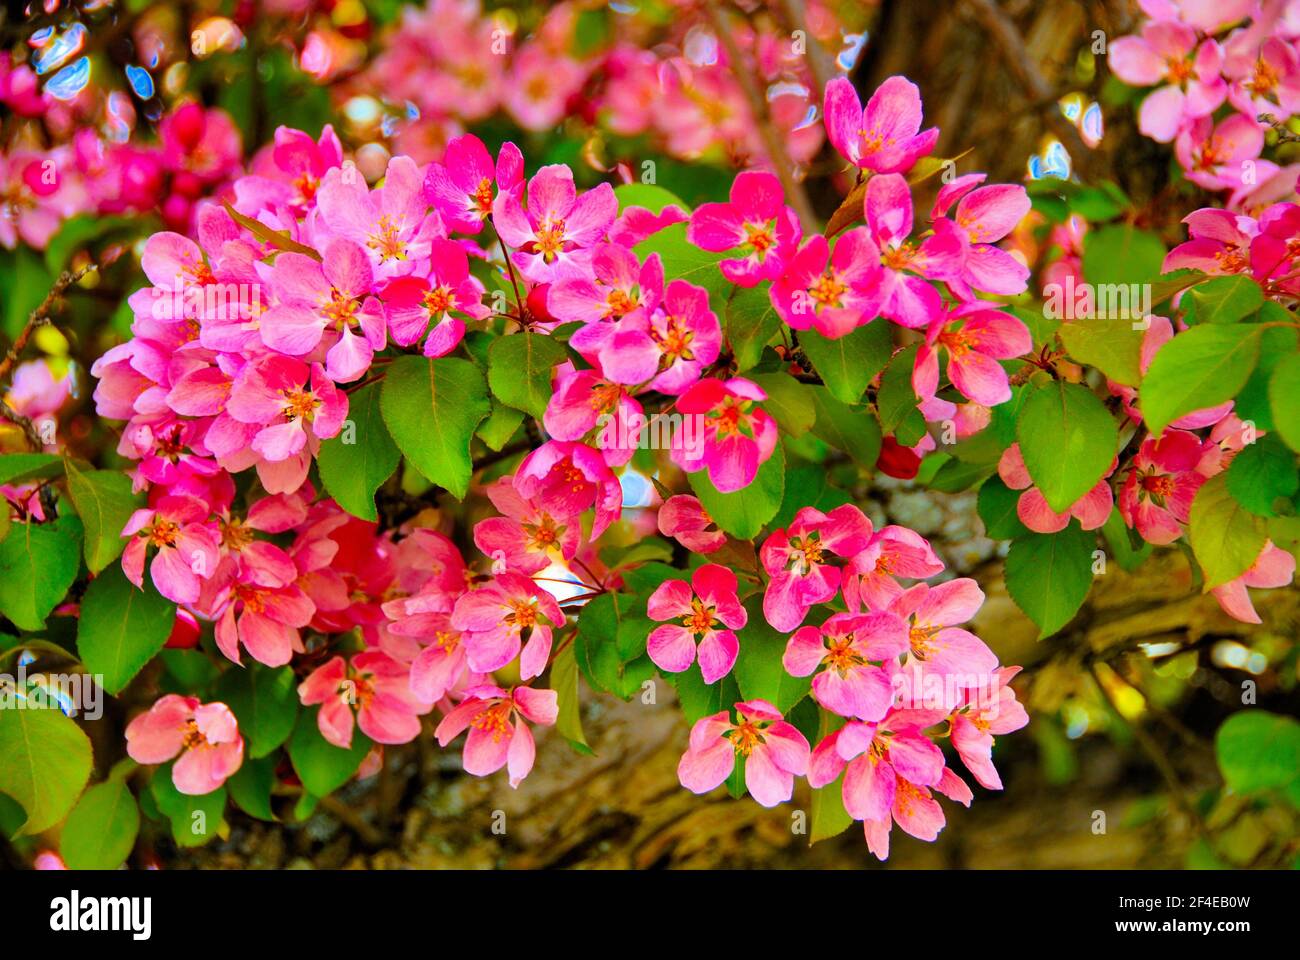 Deep pink blossoms and green leaves on an ornamental flowering tree in spring. Stock Photo